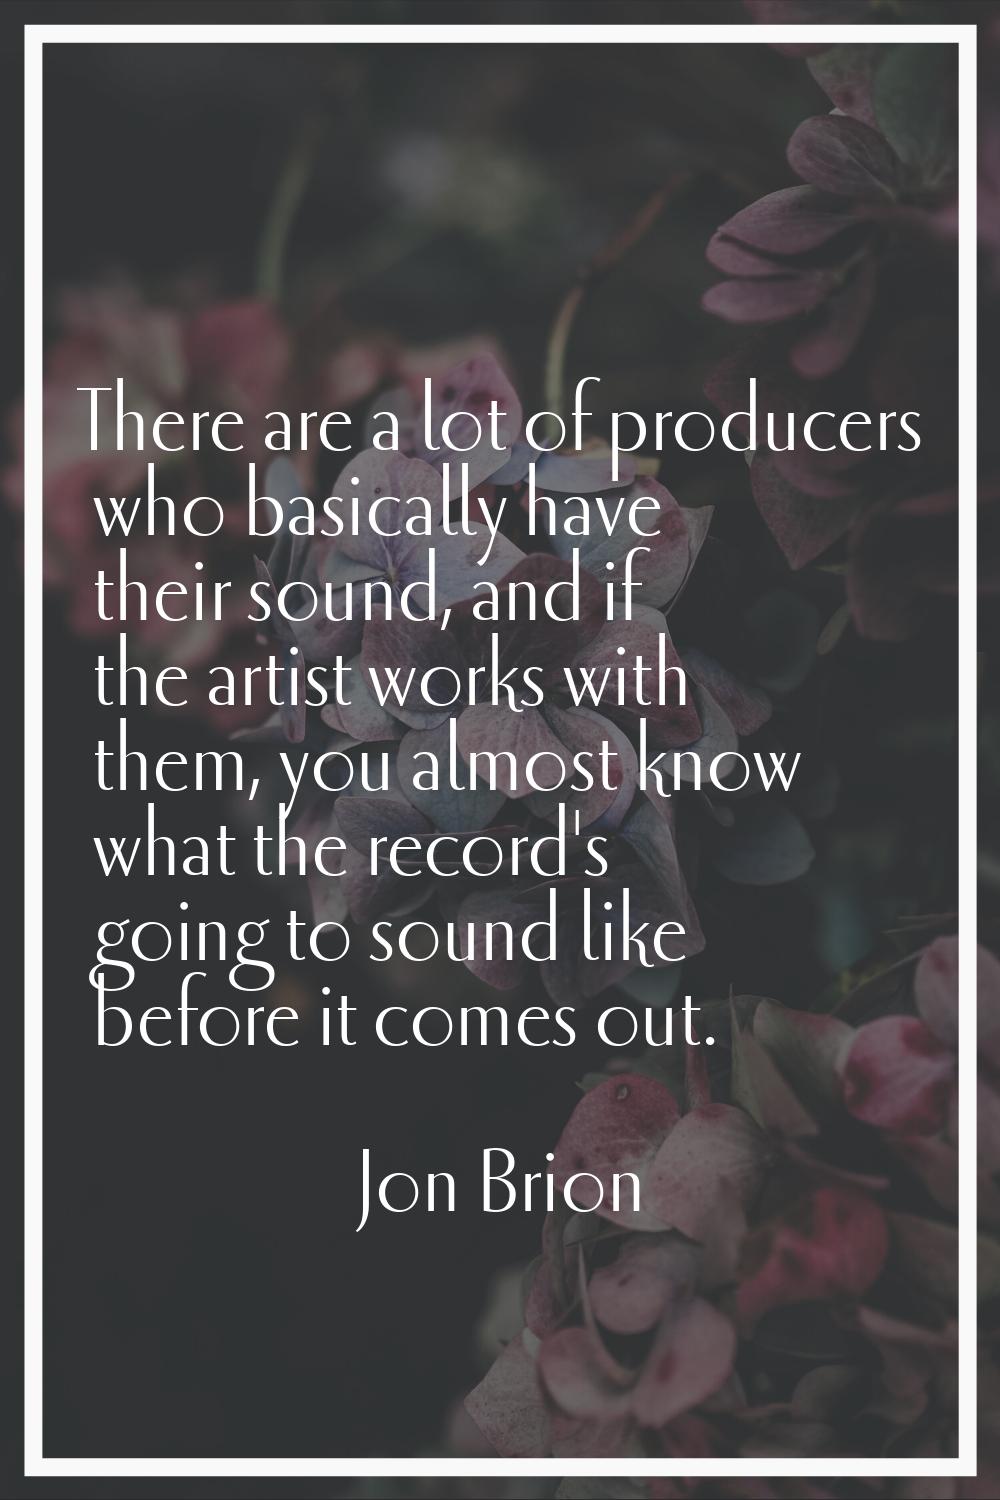 There are a lot of producers who basically have their sound, and if the artist works with them, you